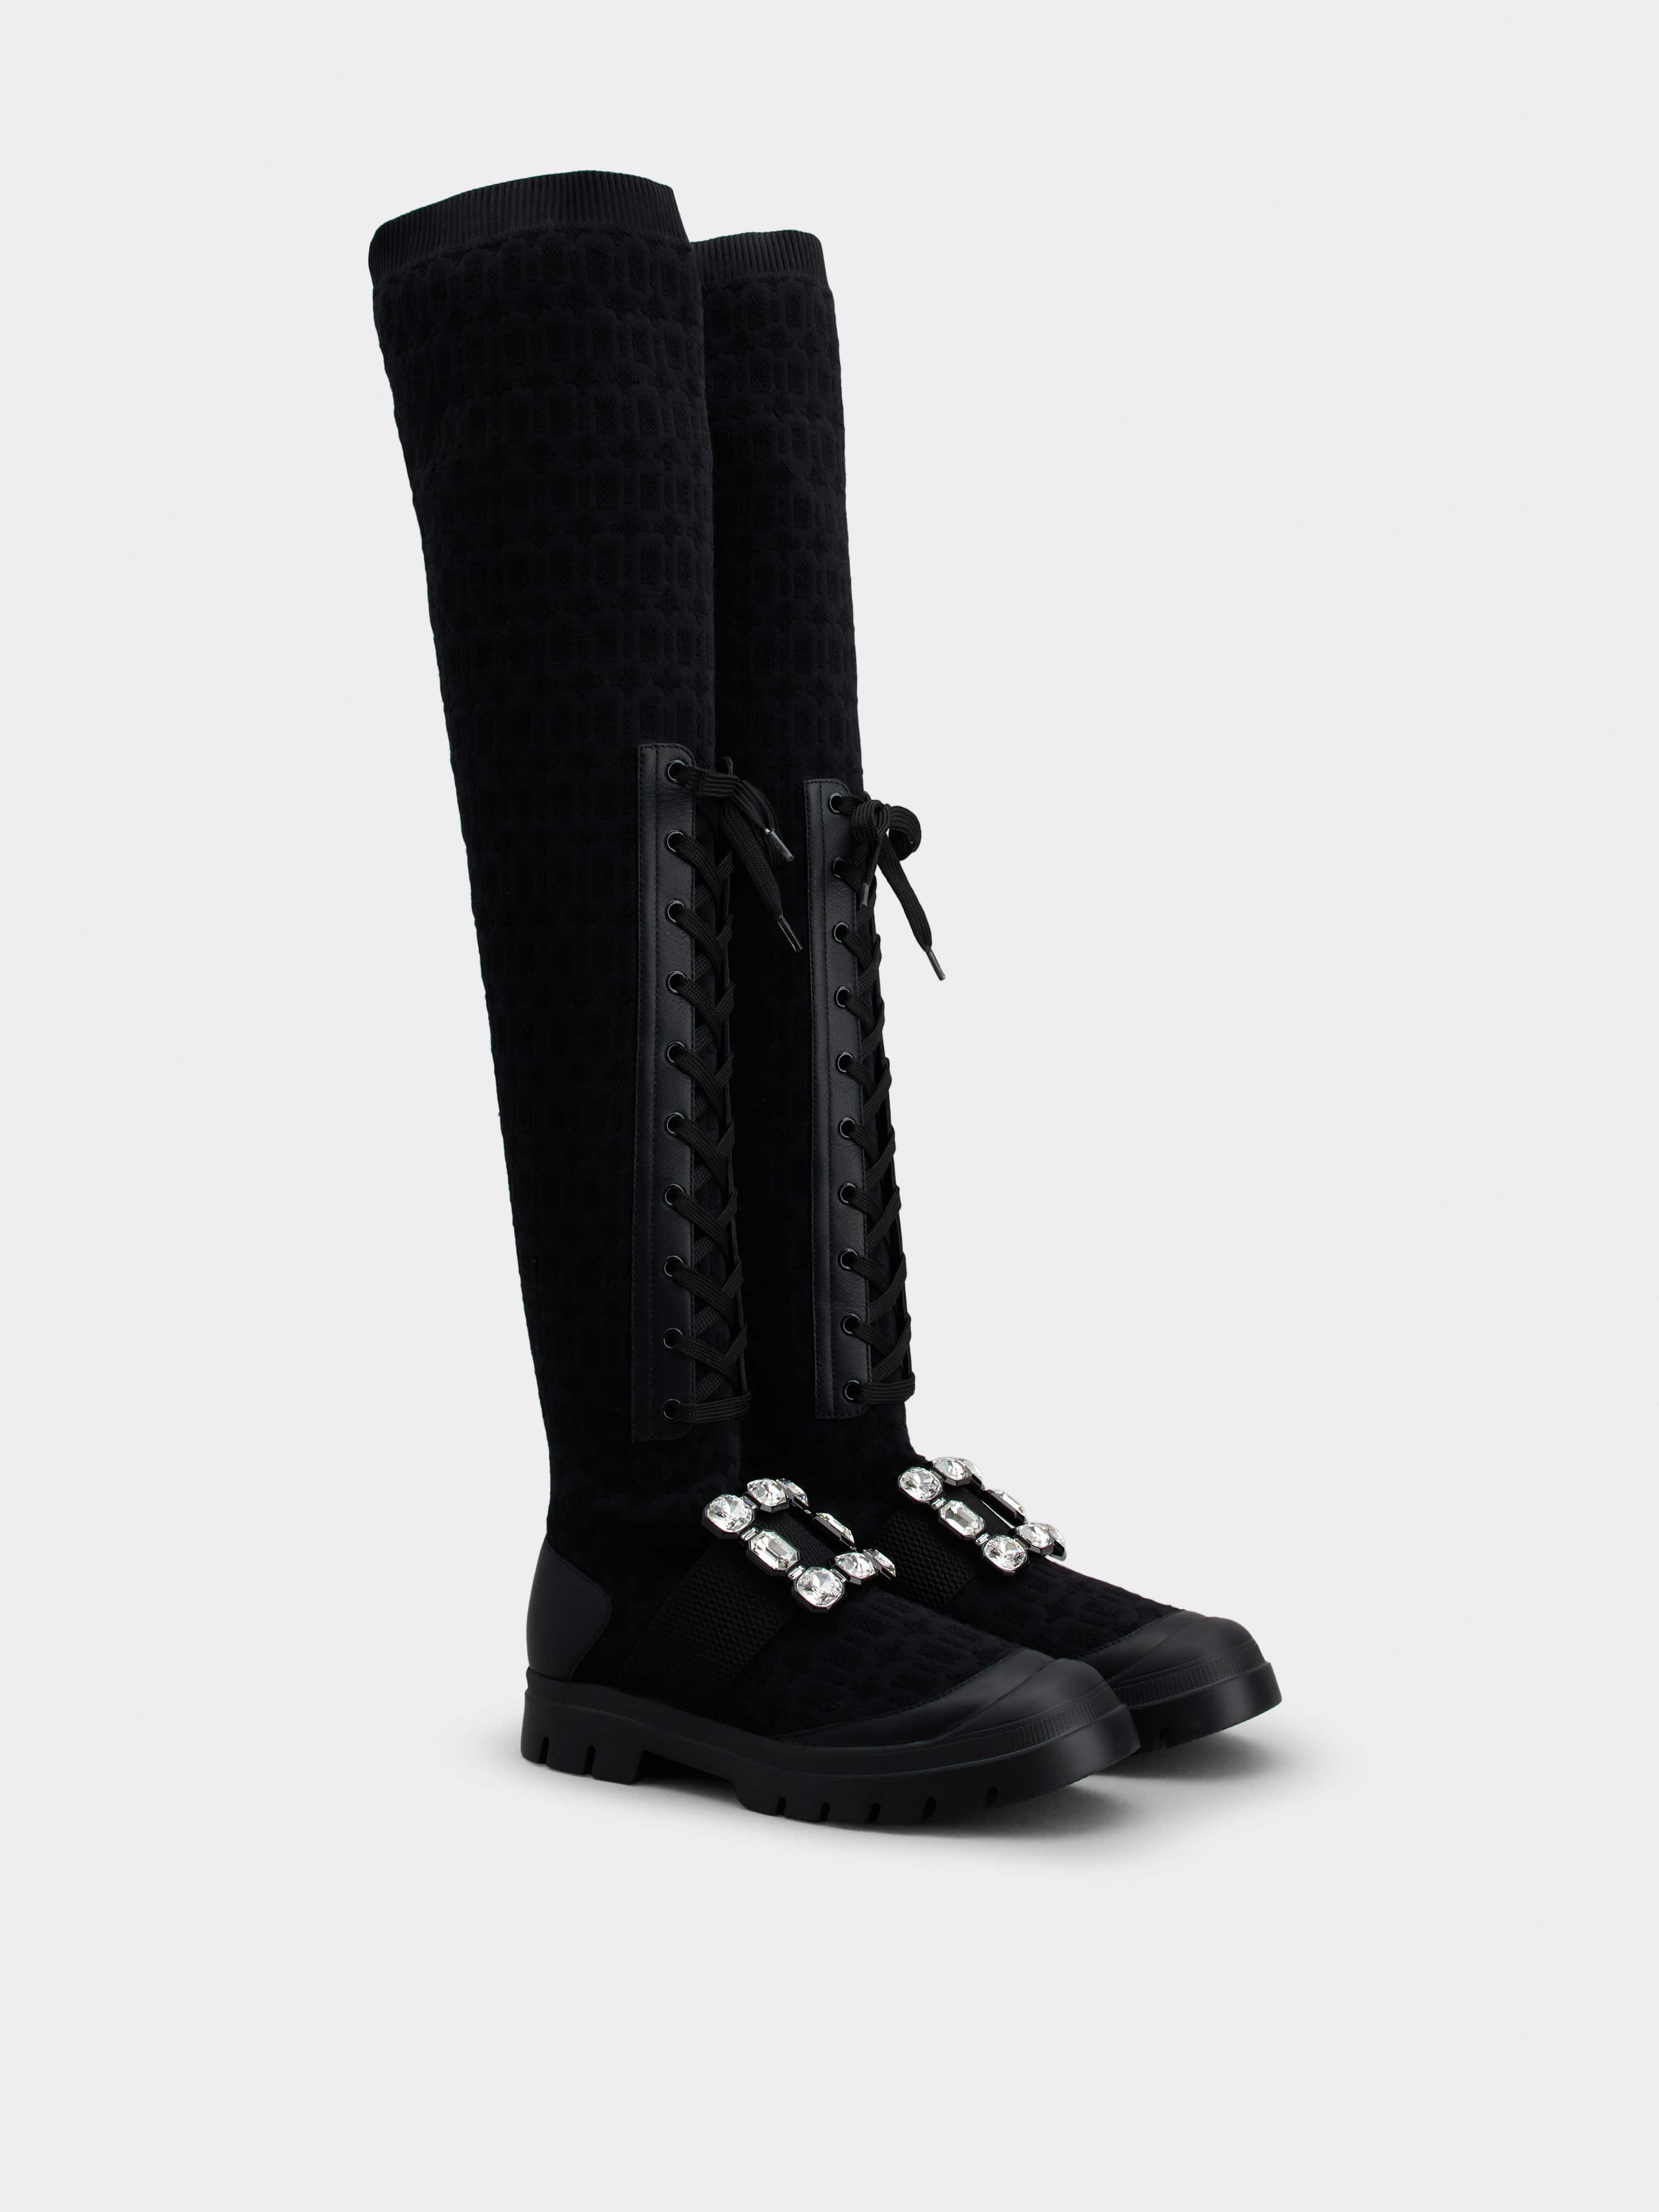 Walky Viv' Strass Buckle Socks Boots in Fabric and Leather - 3